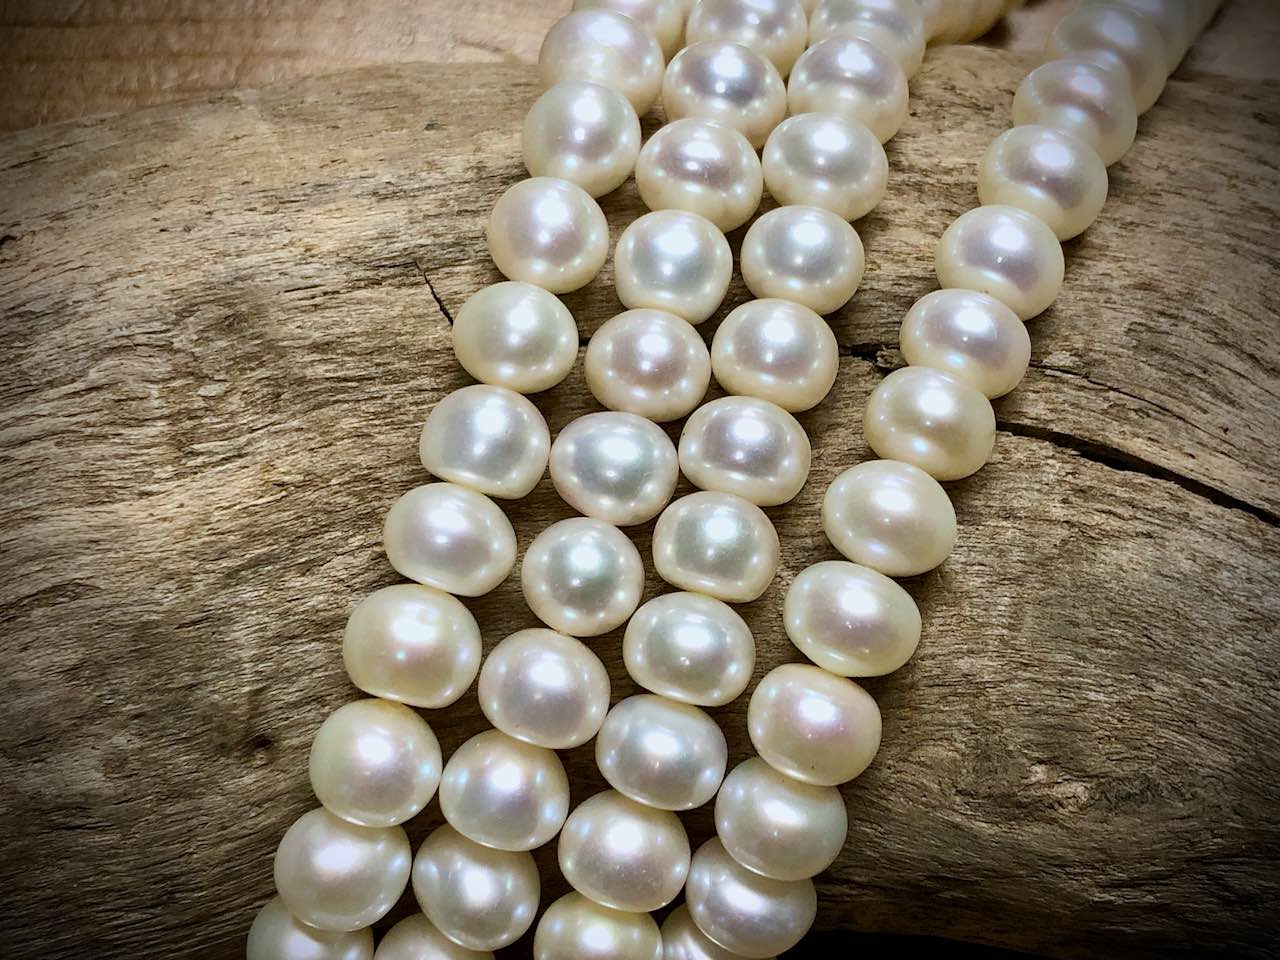 Old-Stock, Vintage Freshwater Pearls - 8mm x 5mm - 16”